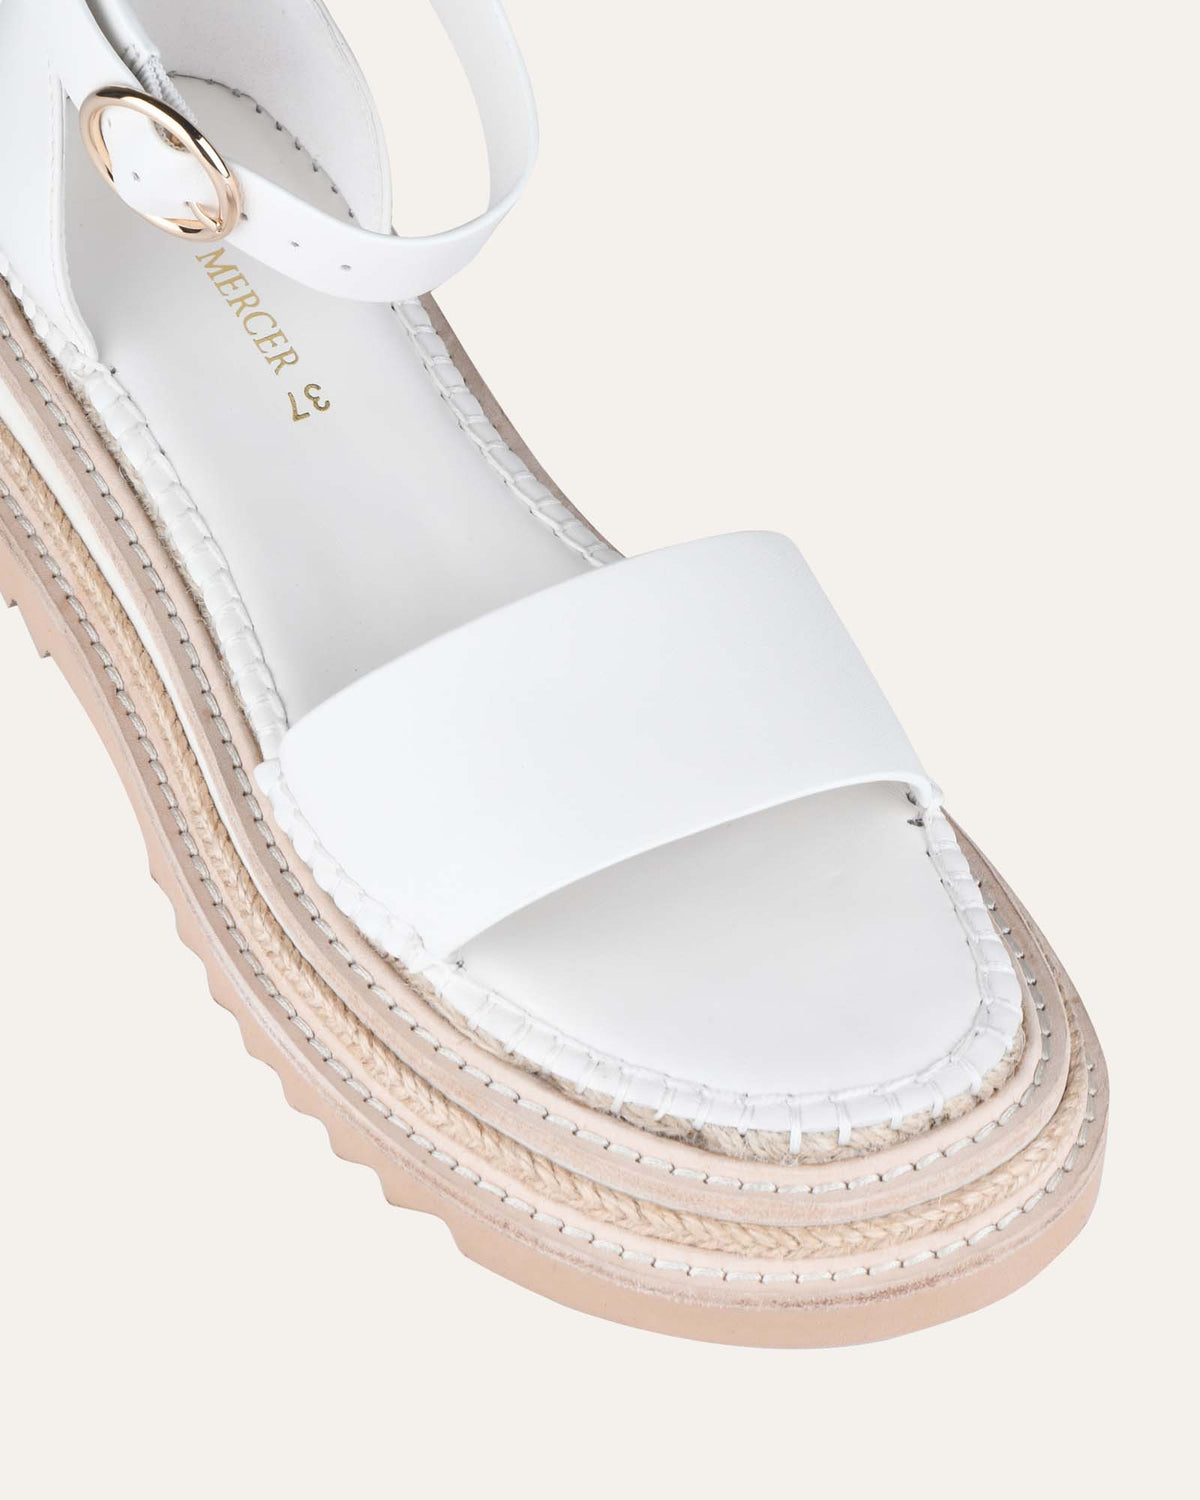 INDIE FLAT ESPADRILLE SANDALS WHITE LEATHER